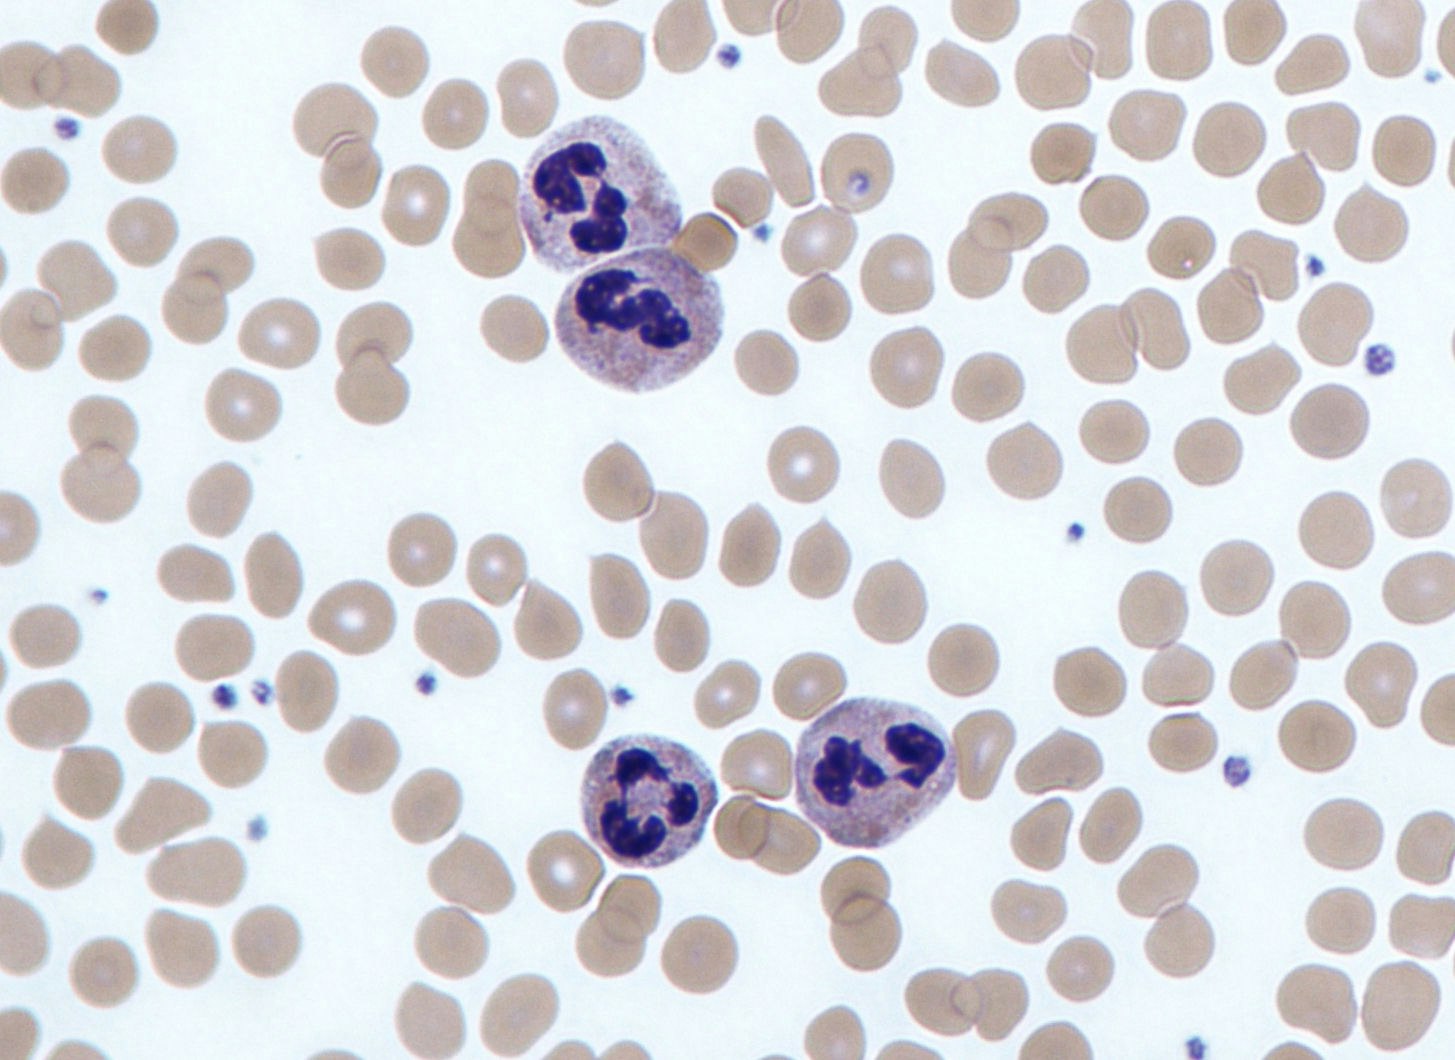 Red blood cells and purple neutrophils, a type of immune cell